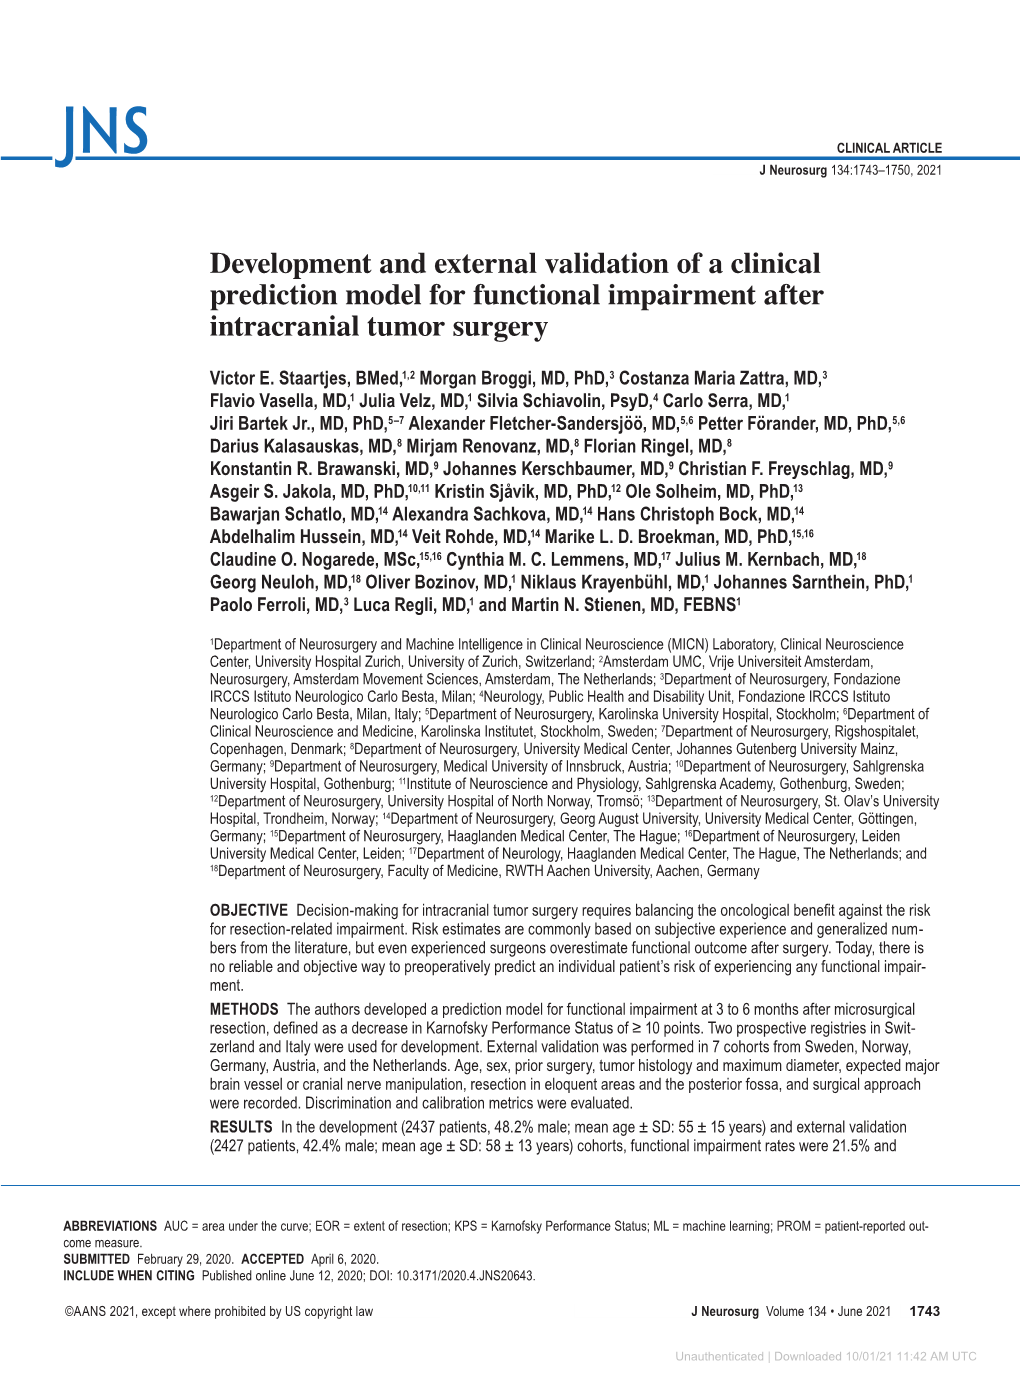 Development and External Validation of a Clinical Prediction Model for Functional Impairment After Intracranial Tumor Surgery